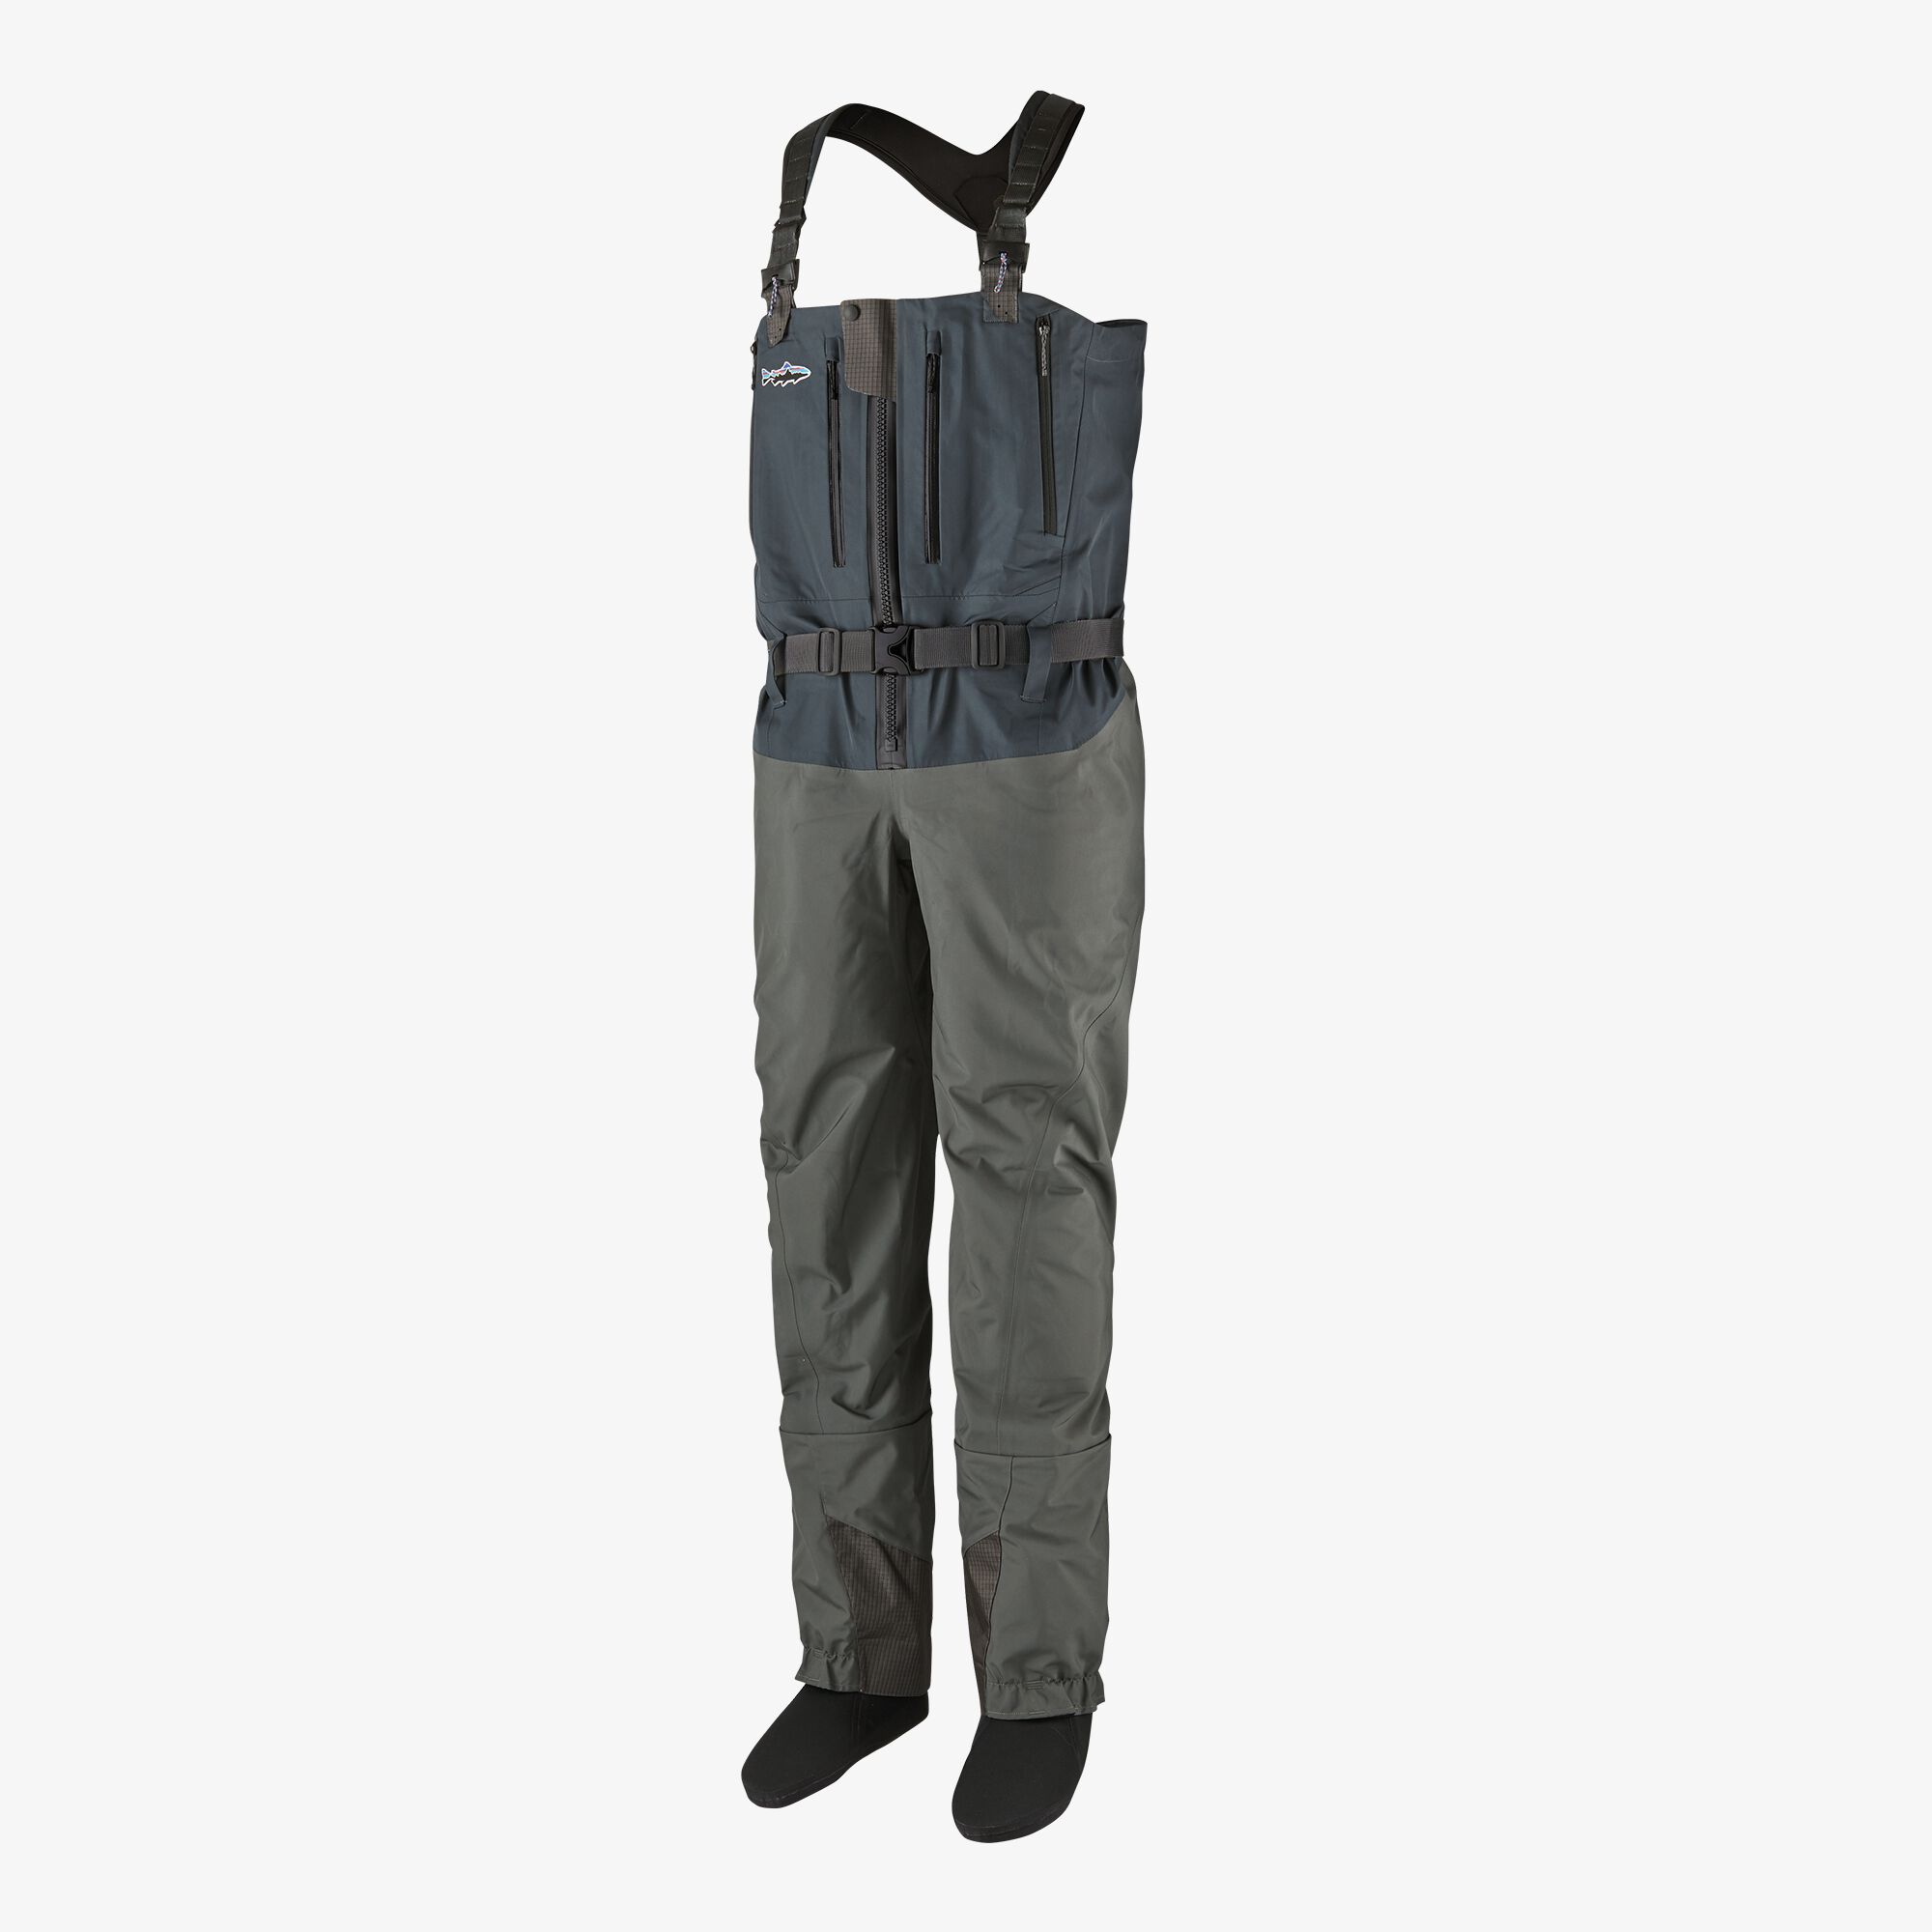 PATAGONIA SWIFTCURRENT EXPEDITION ZIP-FRONT WADER - FORGE GREY - LSM